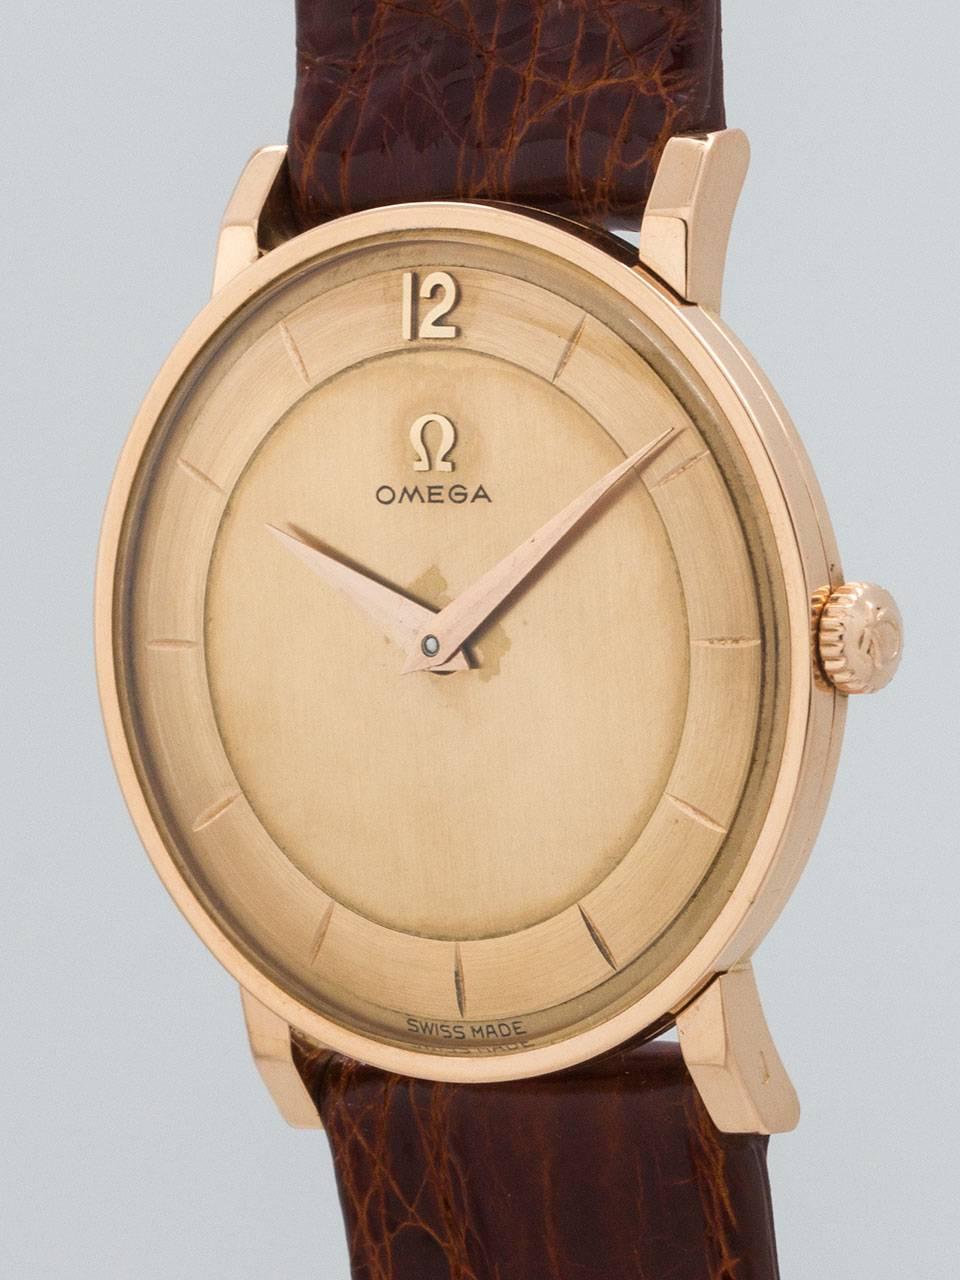 Omega Rose Gold Dress Wristwatch  In Excellent Condition For Sale In West Hollywood, CA